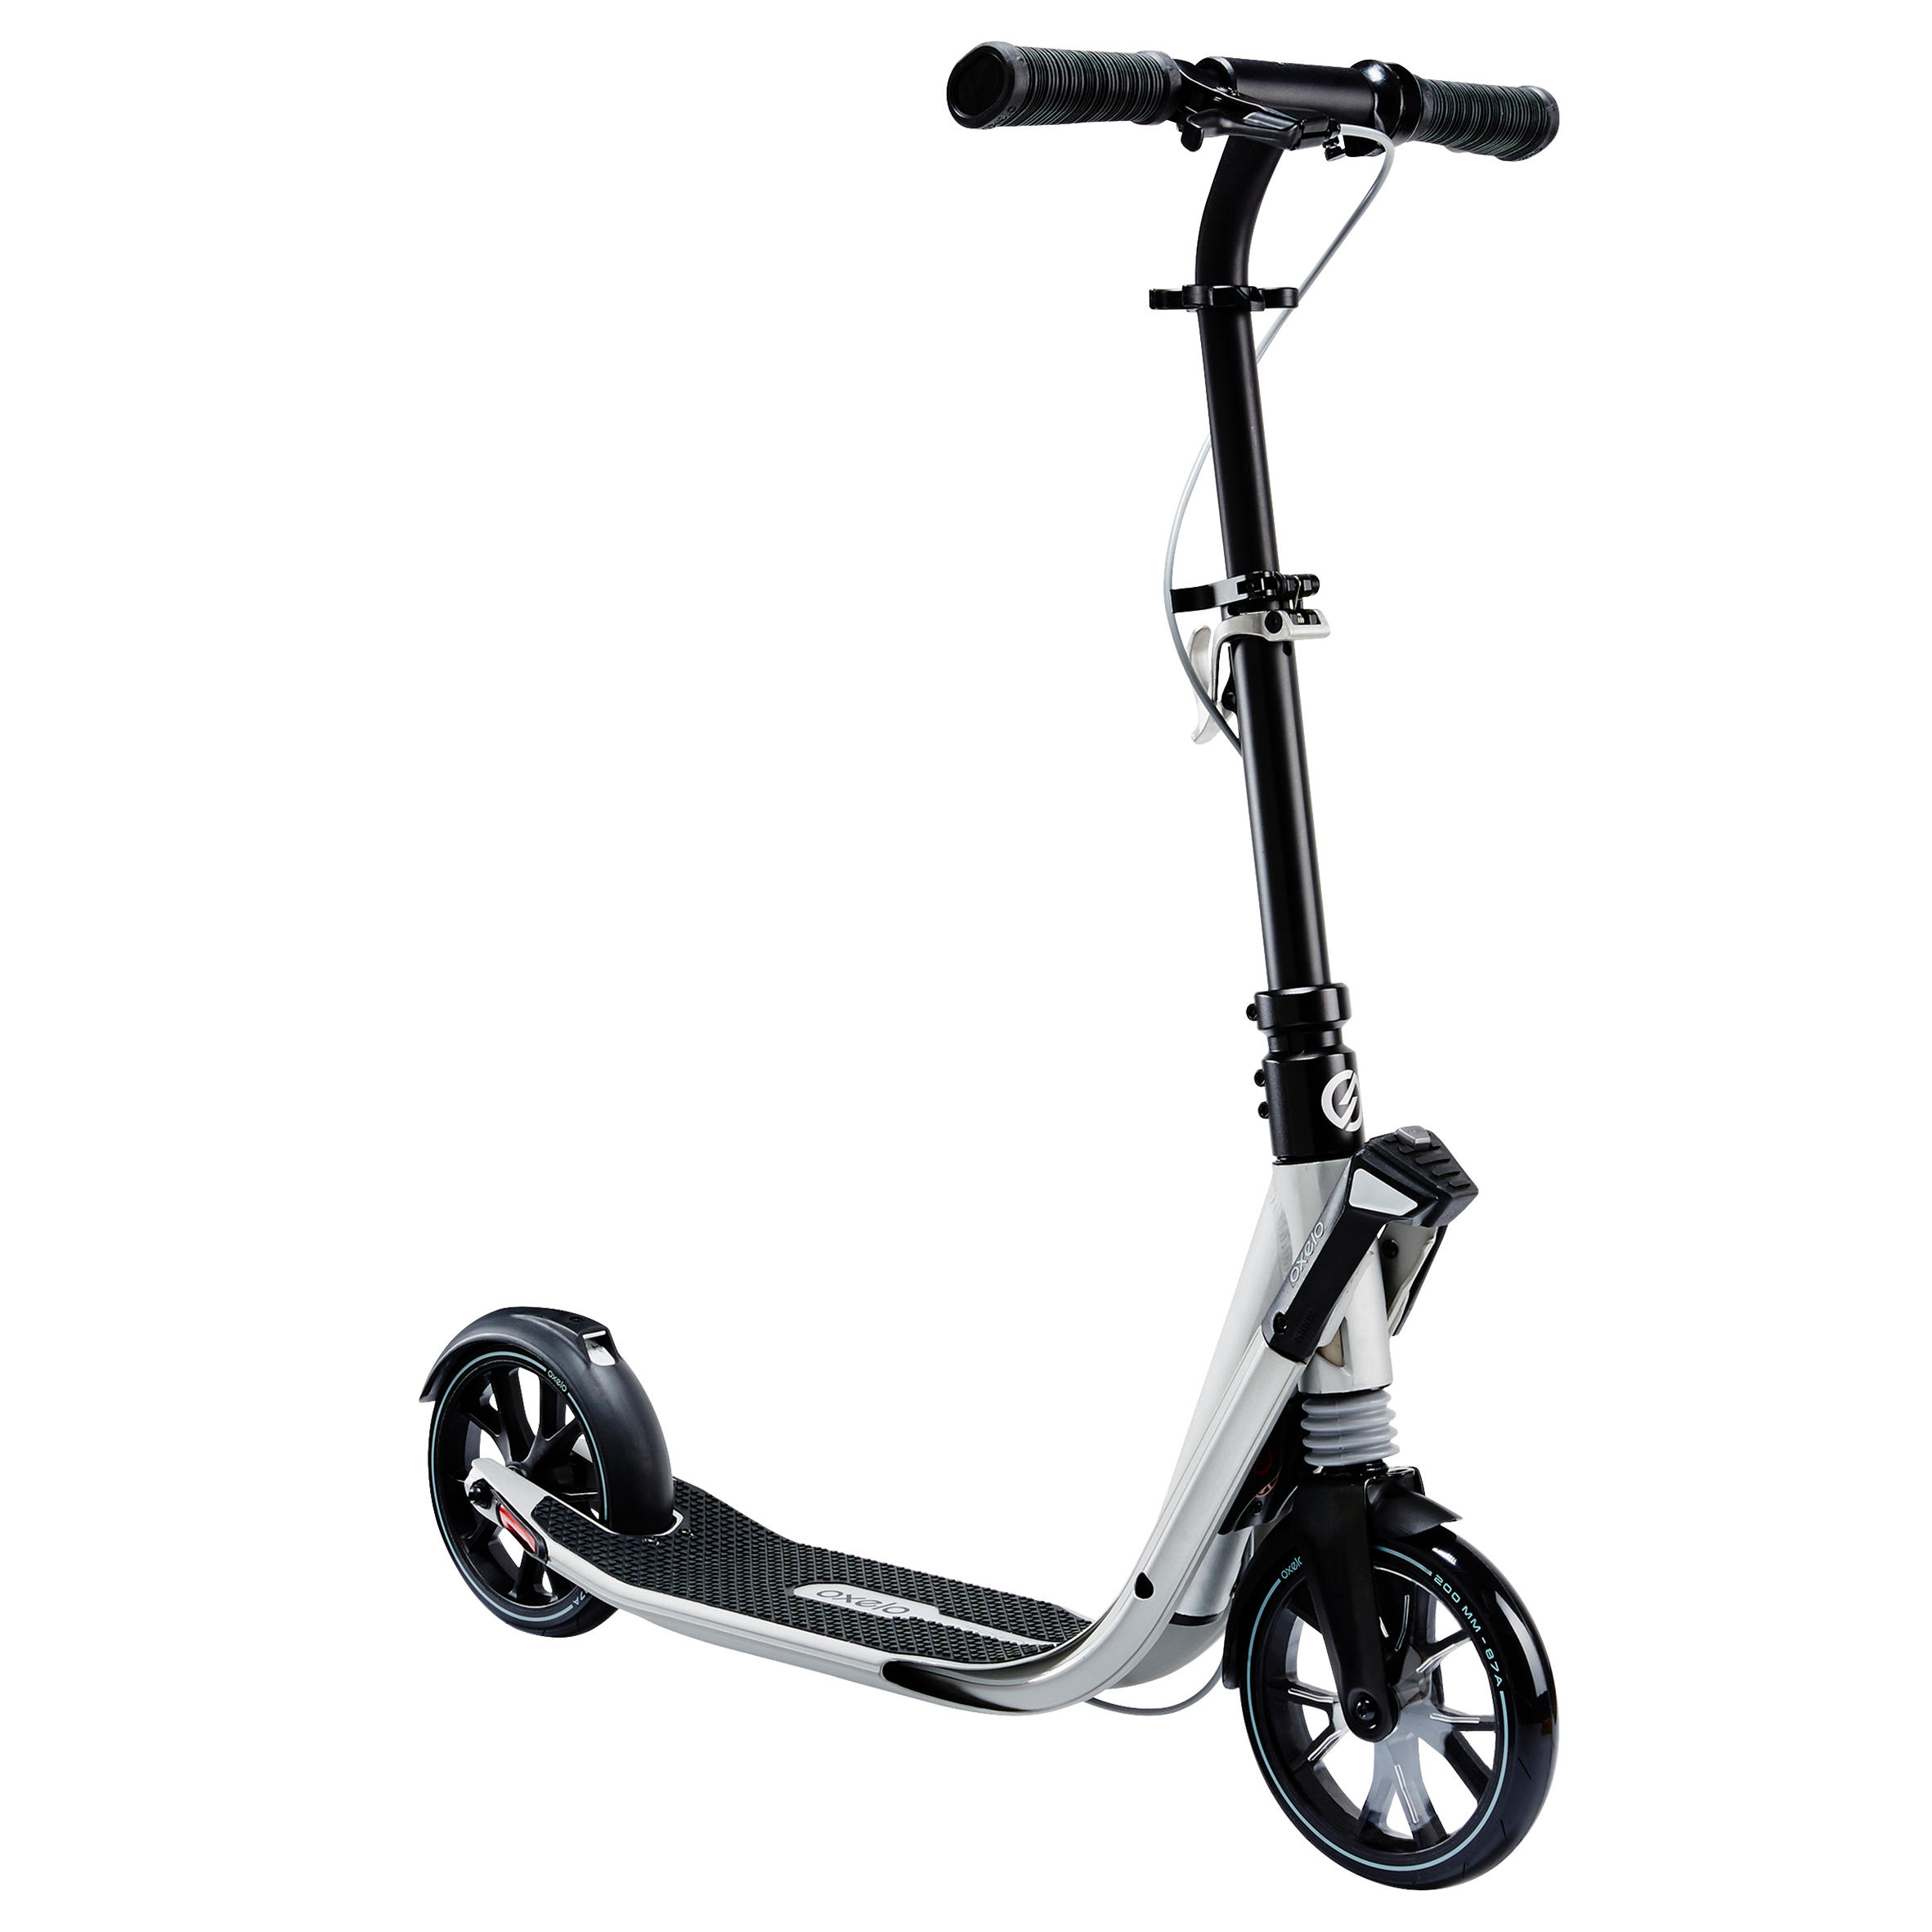 Town 9 Titanium Adult Scooter|Buy 